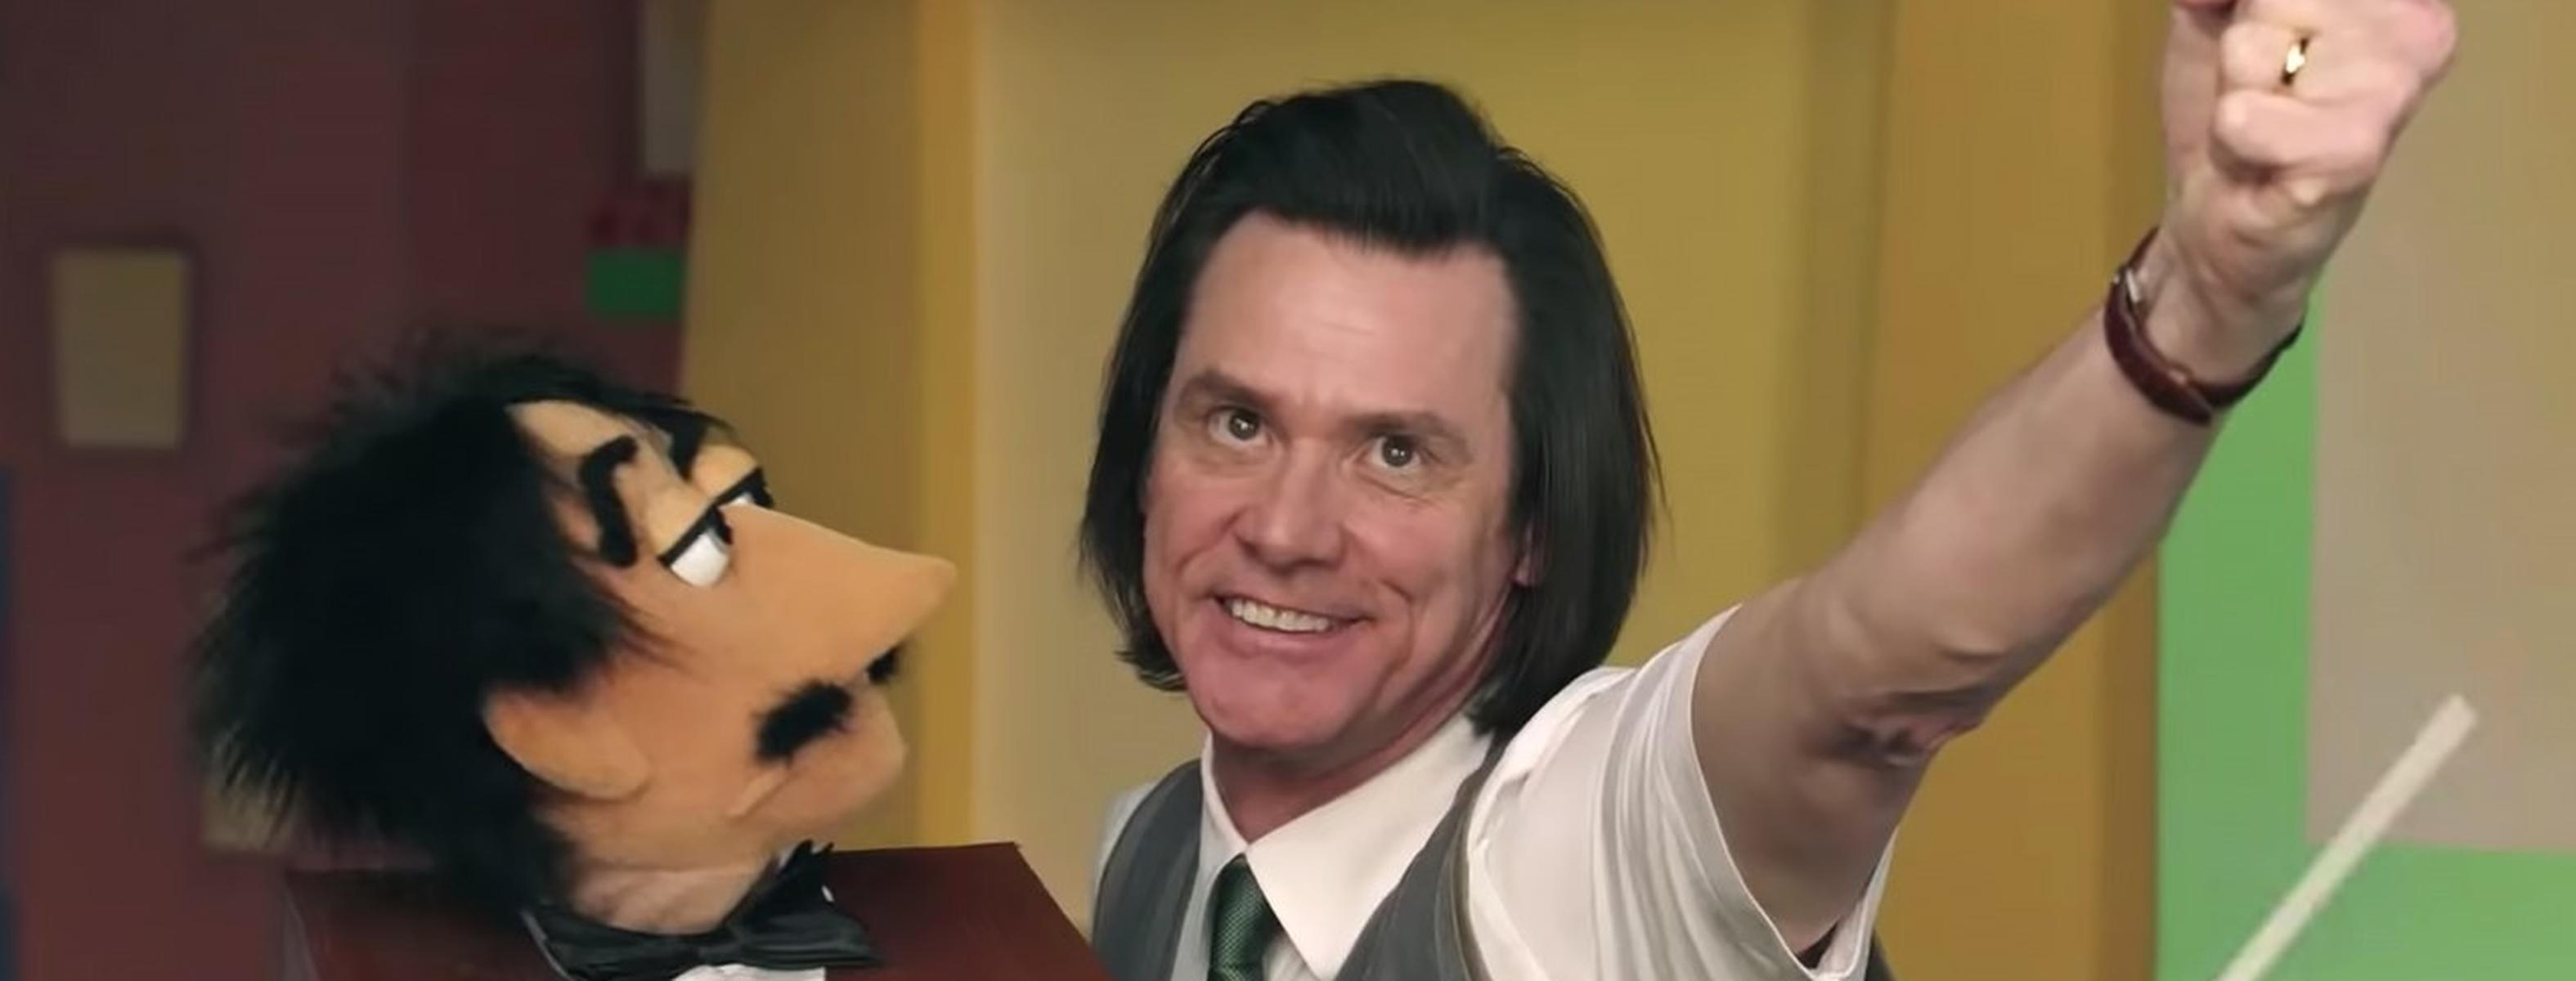 What All Actors Can Learn From Jim Carrey's Dad (Seriously)